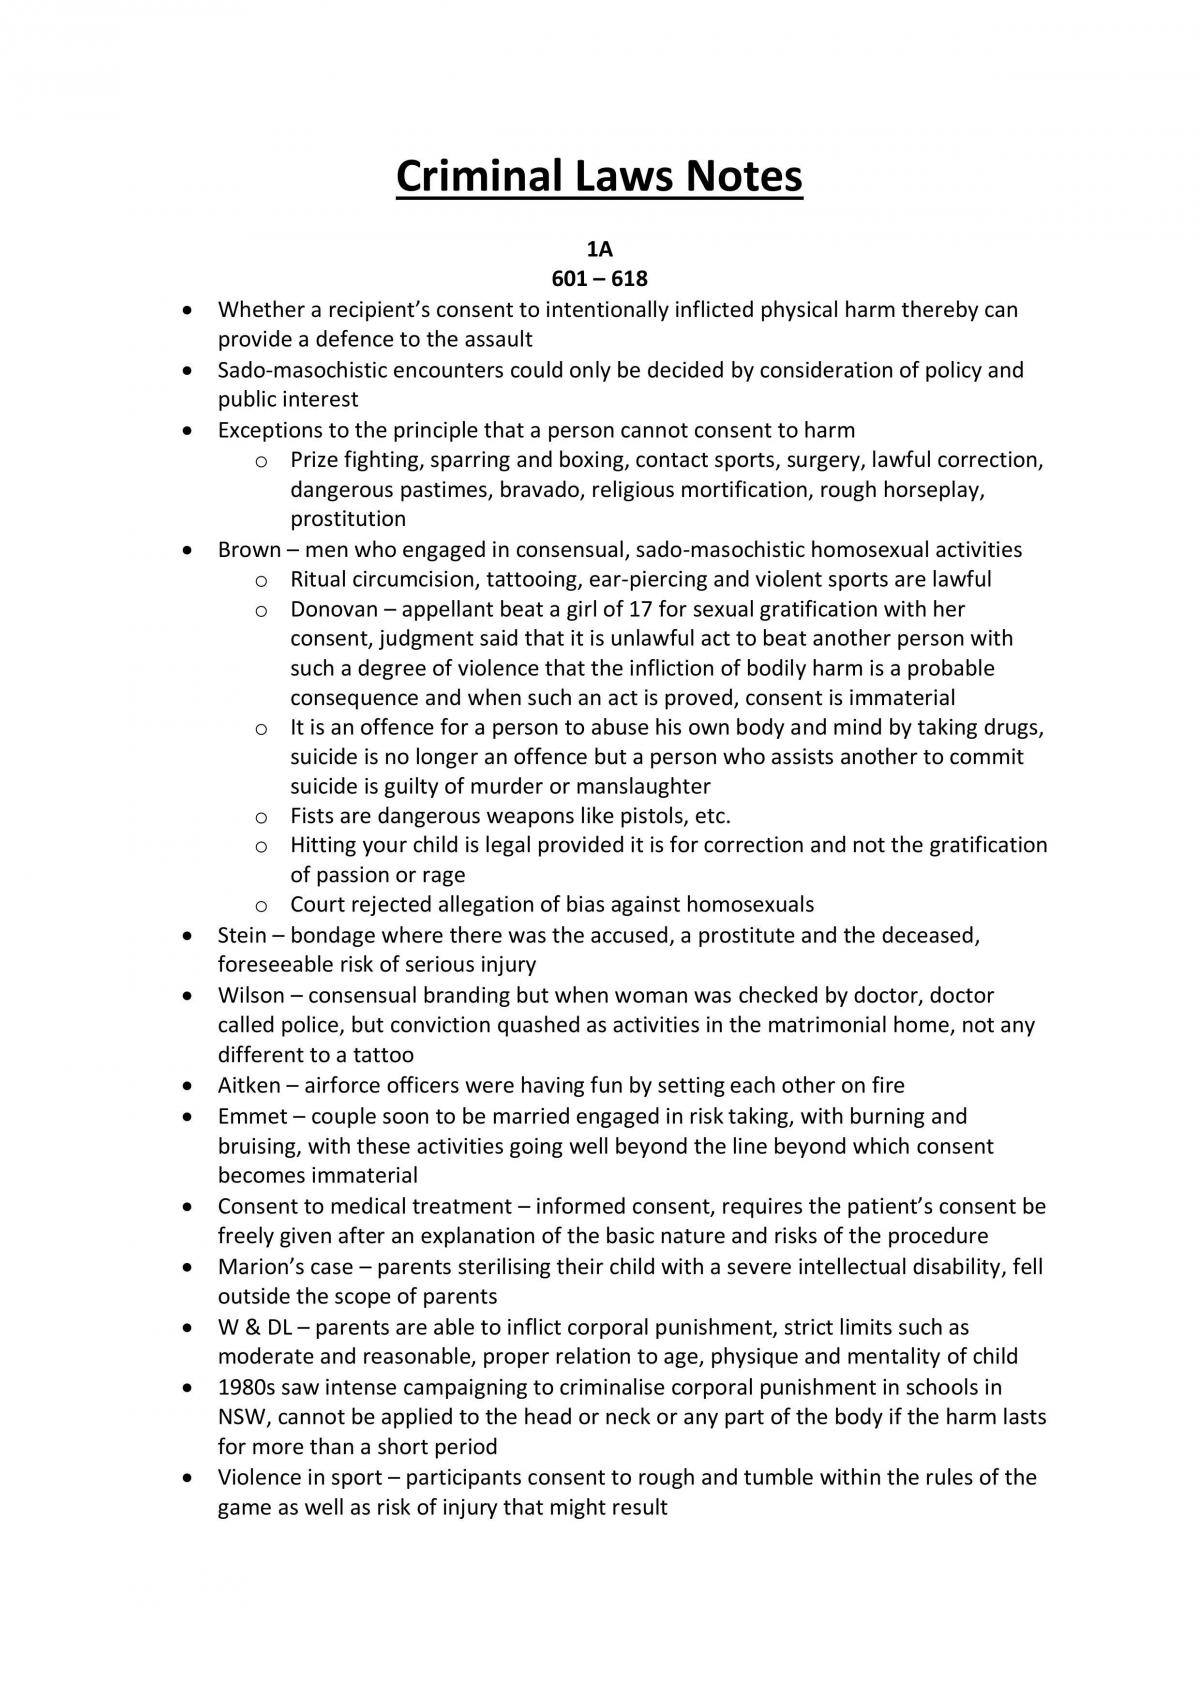 LAWS1022 Complete Study Notes for Mid-Sem Exam - Page 1